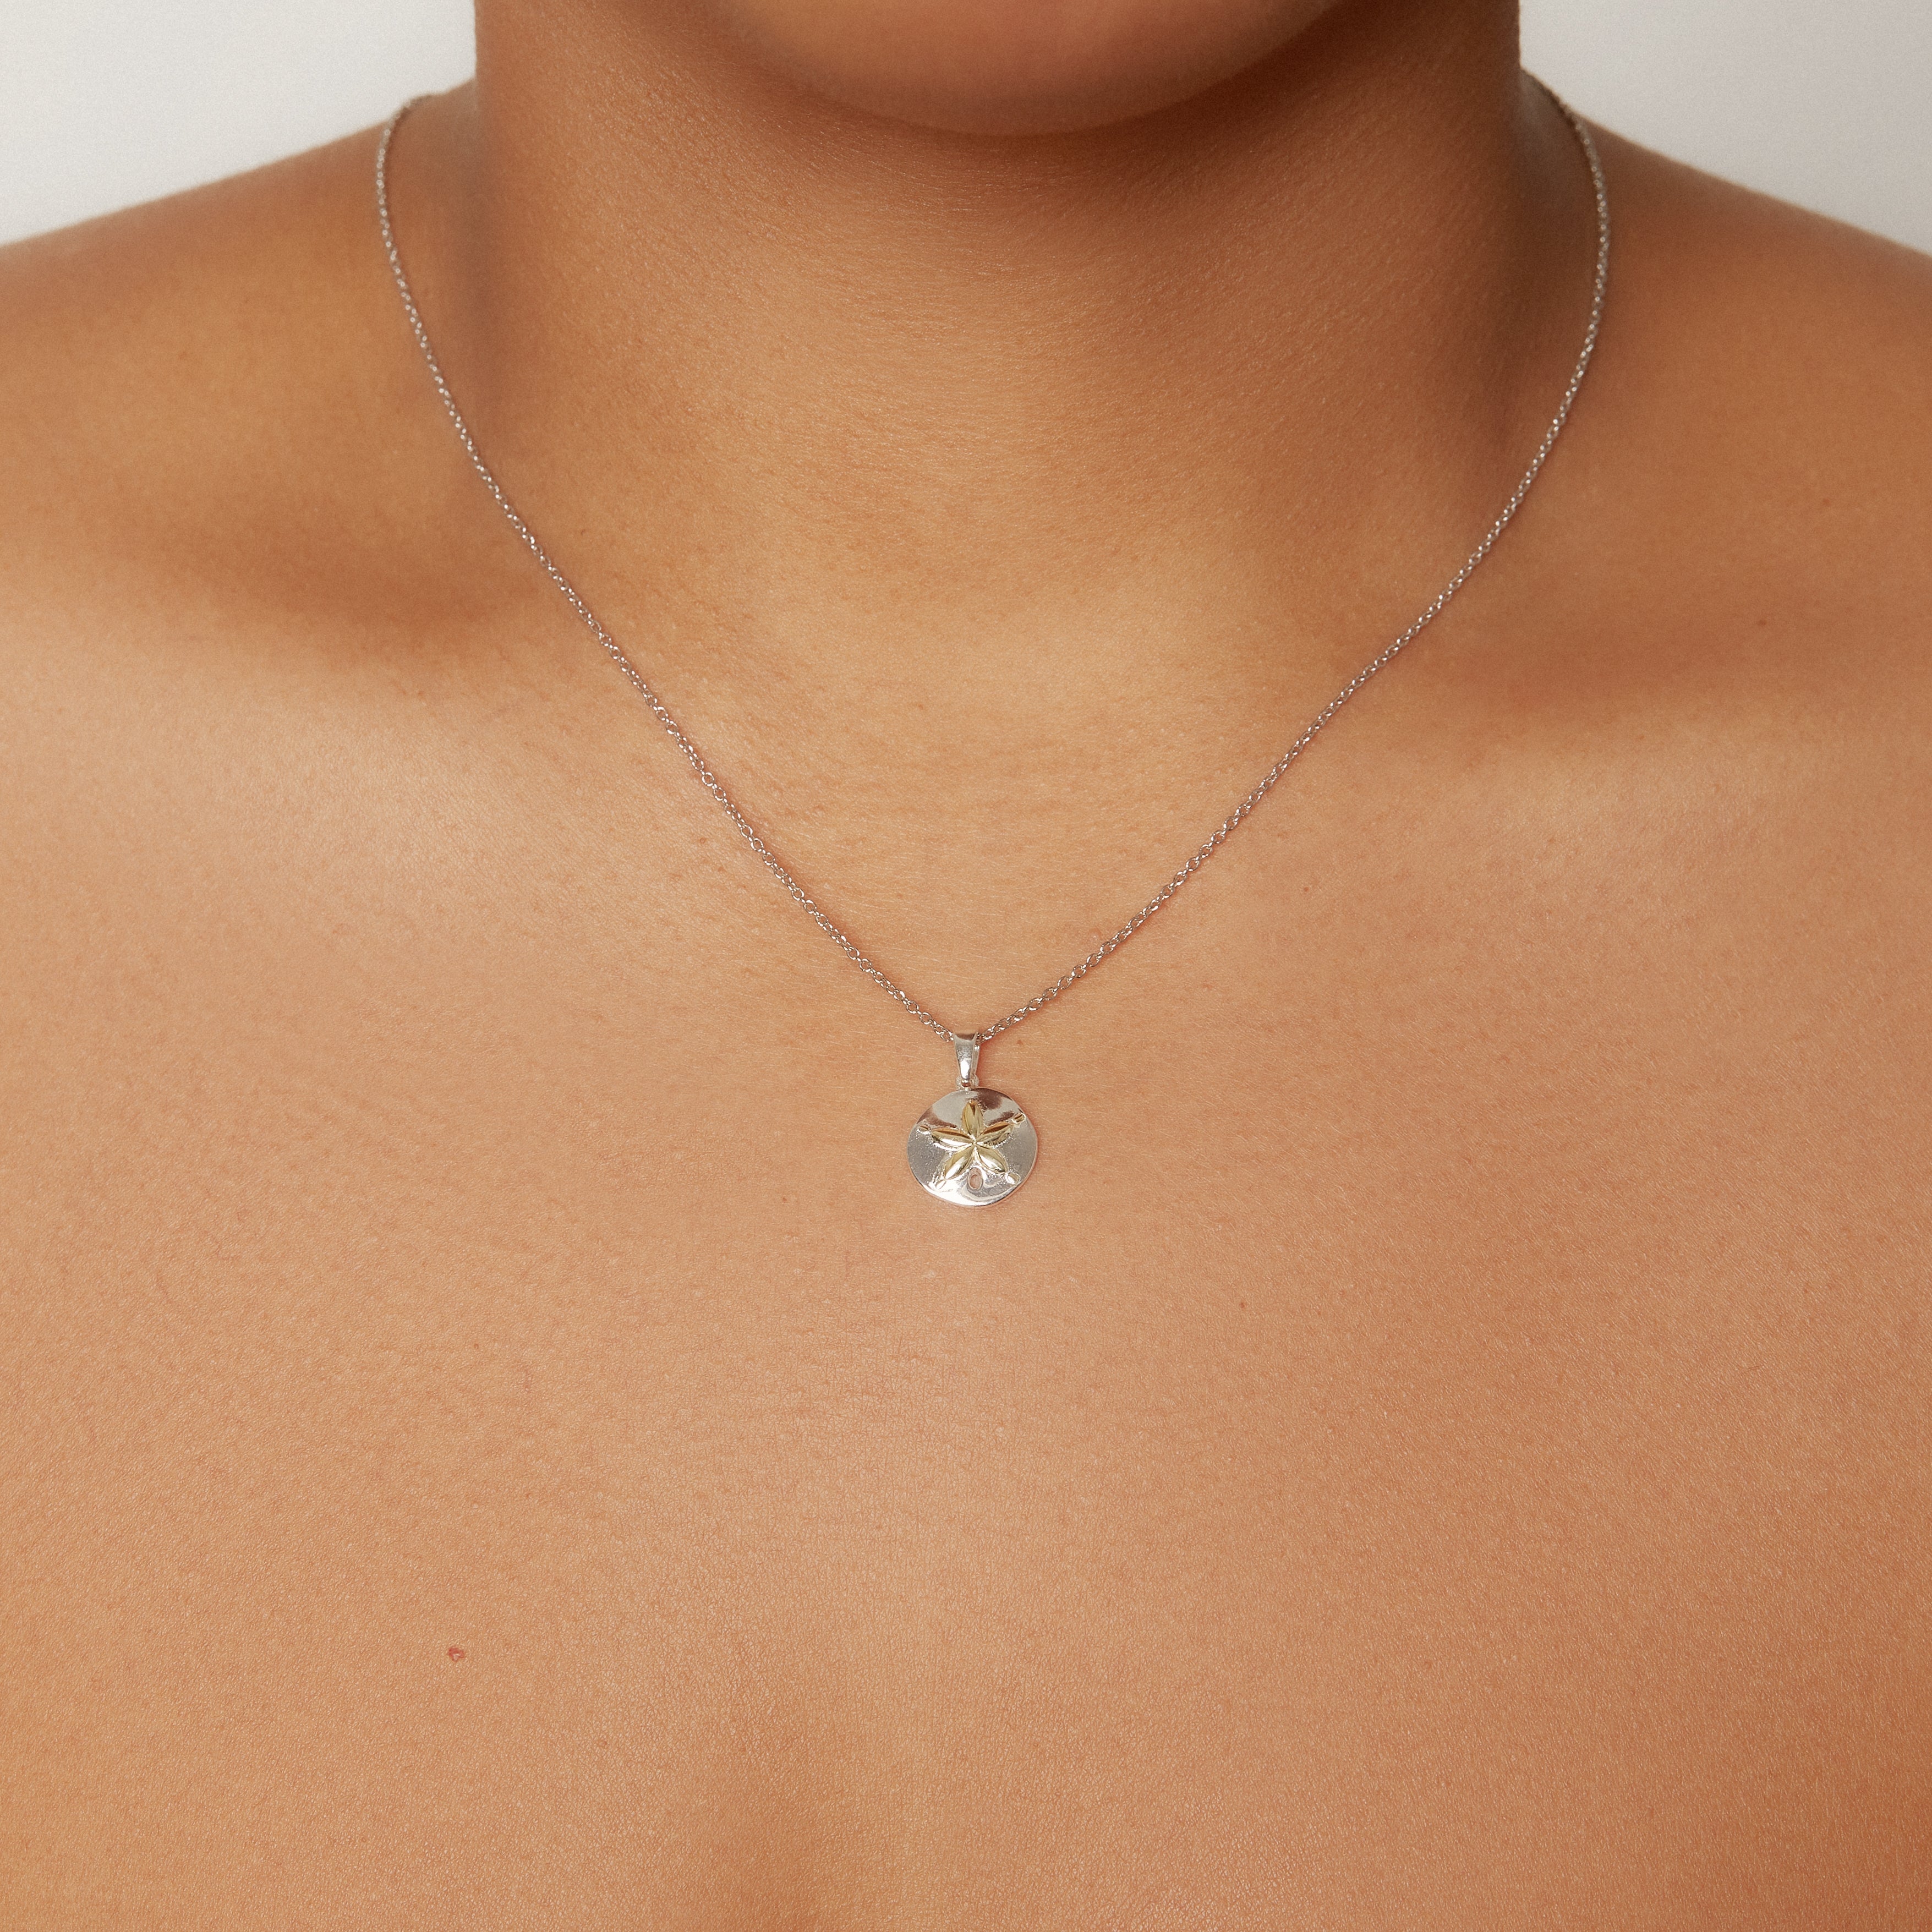 THE TWO TONE SAND DOLLAR NECKLACE